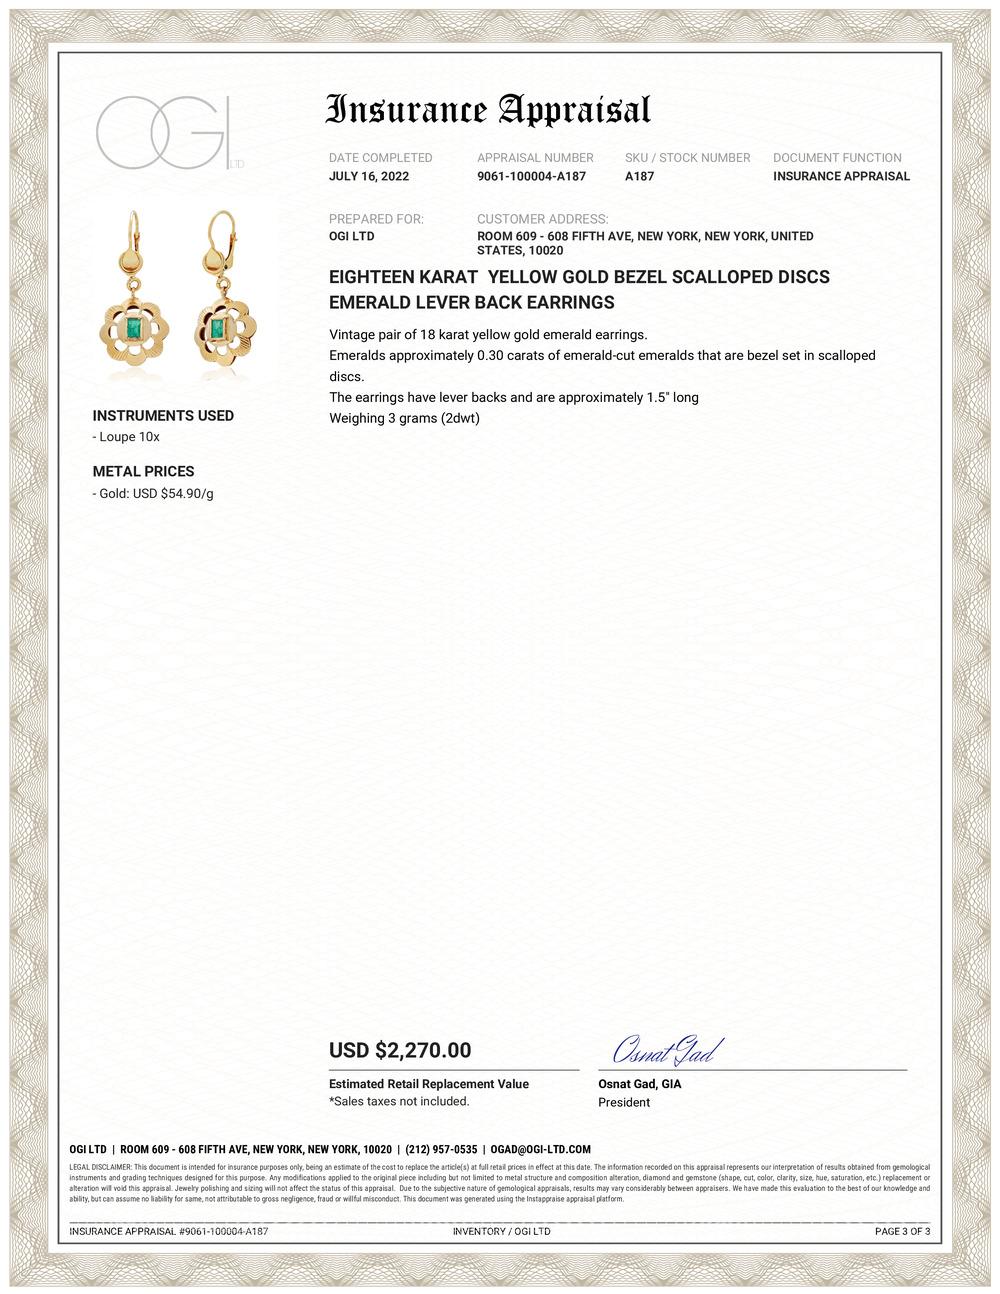 Vintage pair of 18 karat yellow gold Colombia emerald bezel scalloped earrings
Emerald shaped Colombia emeralds weighing 0.30 carats 
The scalloped disc earrings are hanging off lever backs 
The emerald color is deep summer grass green The emerald